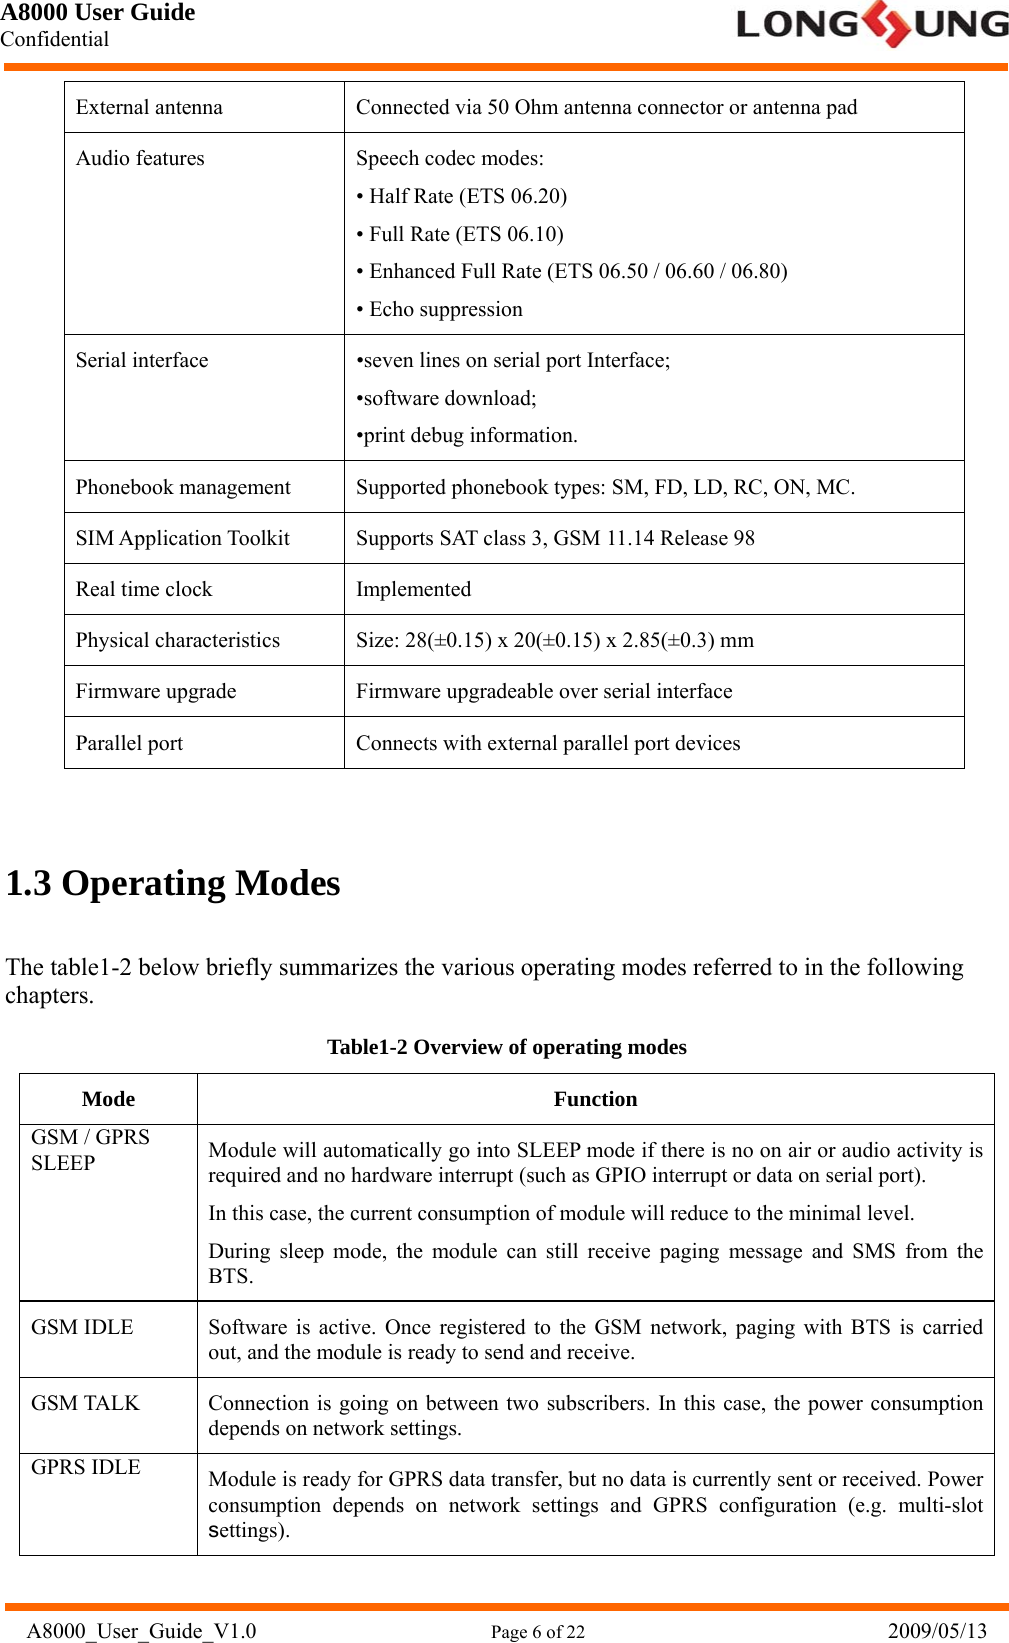 A8000 User Guide Confidential   A8000_User_Guide_V1.0                      Page 6 of 22                            2009/05/13 External antenna  Connected via 50 Ohm antenna connector or antenna pad Audio features  Speech codec modes: • Half Rate (ETS 06.20) • Full Rate (ETS 06.10) • Enhanced Full Rate (ETS 06.50 / 06.60 / 06.80) • Echo suppression Serial interface  •seven lines on serial port Interface; •software download; •print debug information. Phonebook management  Supported phonebook types: SM, FD, LD, RC, ON, MC. SIM Application Toolkit  Supports SAT class 3, GSM 11.14 Release 98 Real time clock  Implemented Physical characteristics  Size: 28(±0.15) x 20(±0.15) x 2.85(±0.3) mm Firmware upgrade  Firmware upgradeable over serial interface Parallel port  Connects with external parallel port devices  1.3 Operating Modes The table1-2 below briefly summarizes the various operating modes referred to in the following chapters. Table1-2 Overview of operating modes Mode Function GSM / GPRS SLEEP  Module will automatically go into SLEEP mode if there is no on air or audio activity is required and no hardware interrupt (such as GPIO interrupt or data on serial port). In this case, the current consumption of module will reduce to the minimal level. During sleep mode, the module can still receive paging message and SMS from the BTS. GSM IDLE  Software is active. Once registered to the GSM network, paging with BTS is carried out, and the module is ready to send and receive. GSM TALK  Connection is going on between two subscribers. In this case, the power consumption depends on network settings. GPRS IDLE  Module is ready for GPRS data transfer, but no data is currently sent or received. Power consumption depends on network settings and GPRS configuration (e.g. multi-slot settings). 